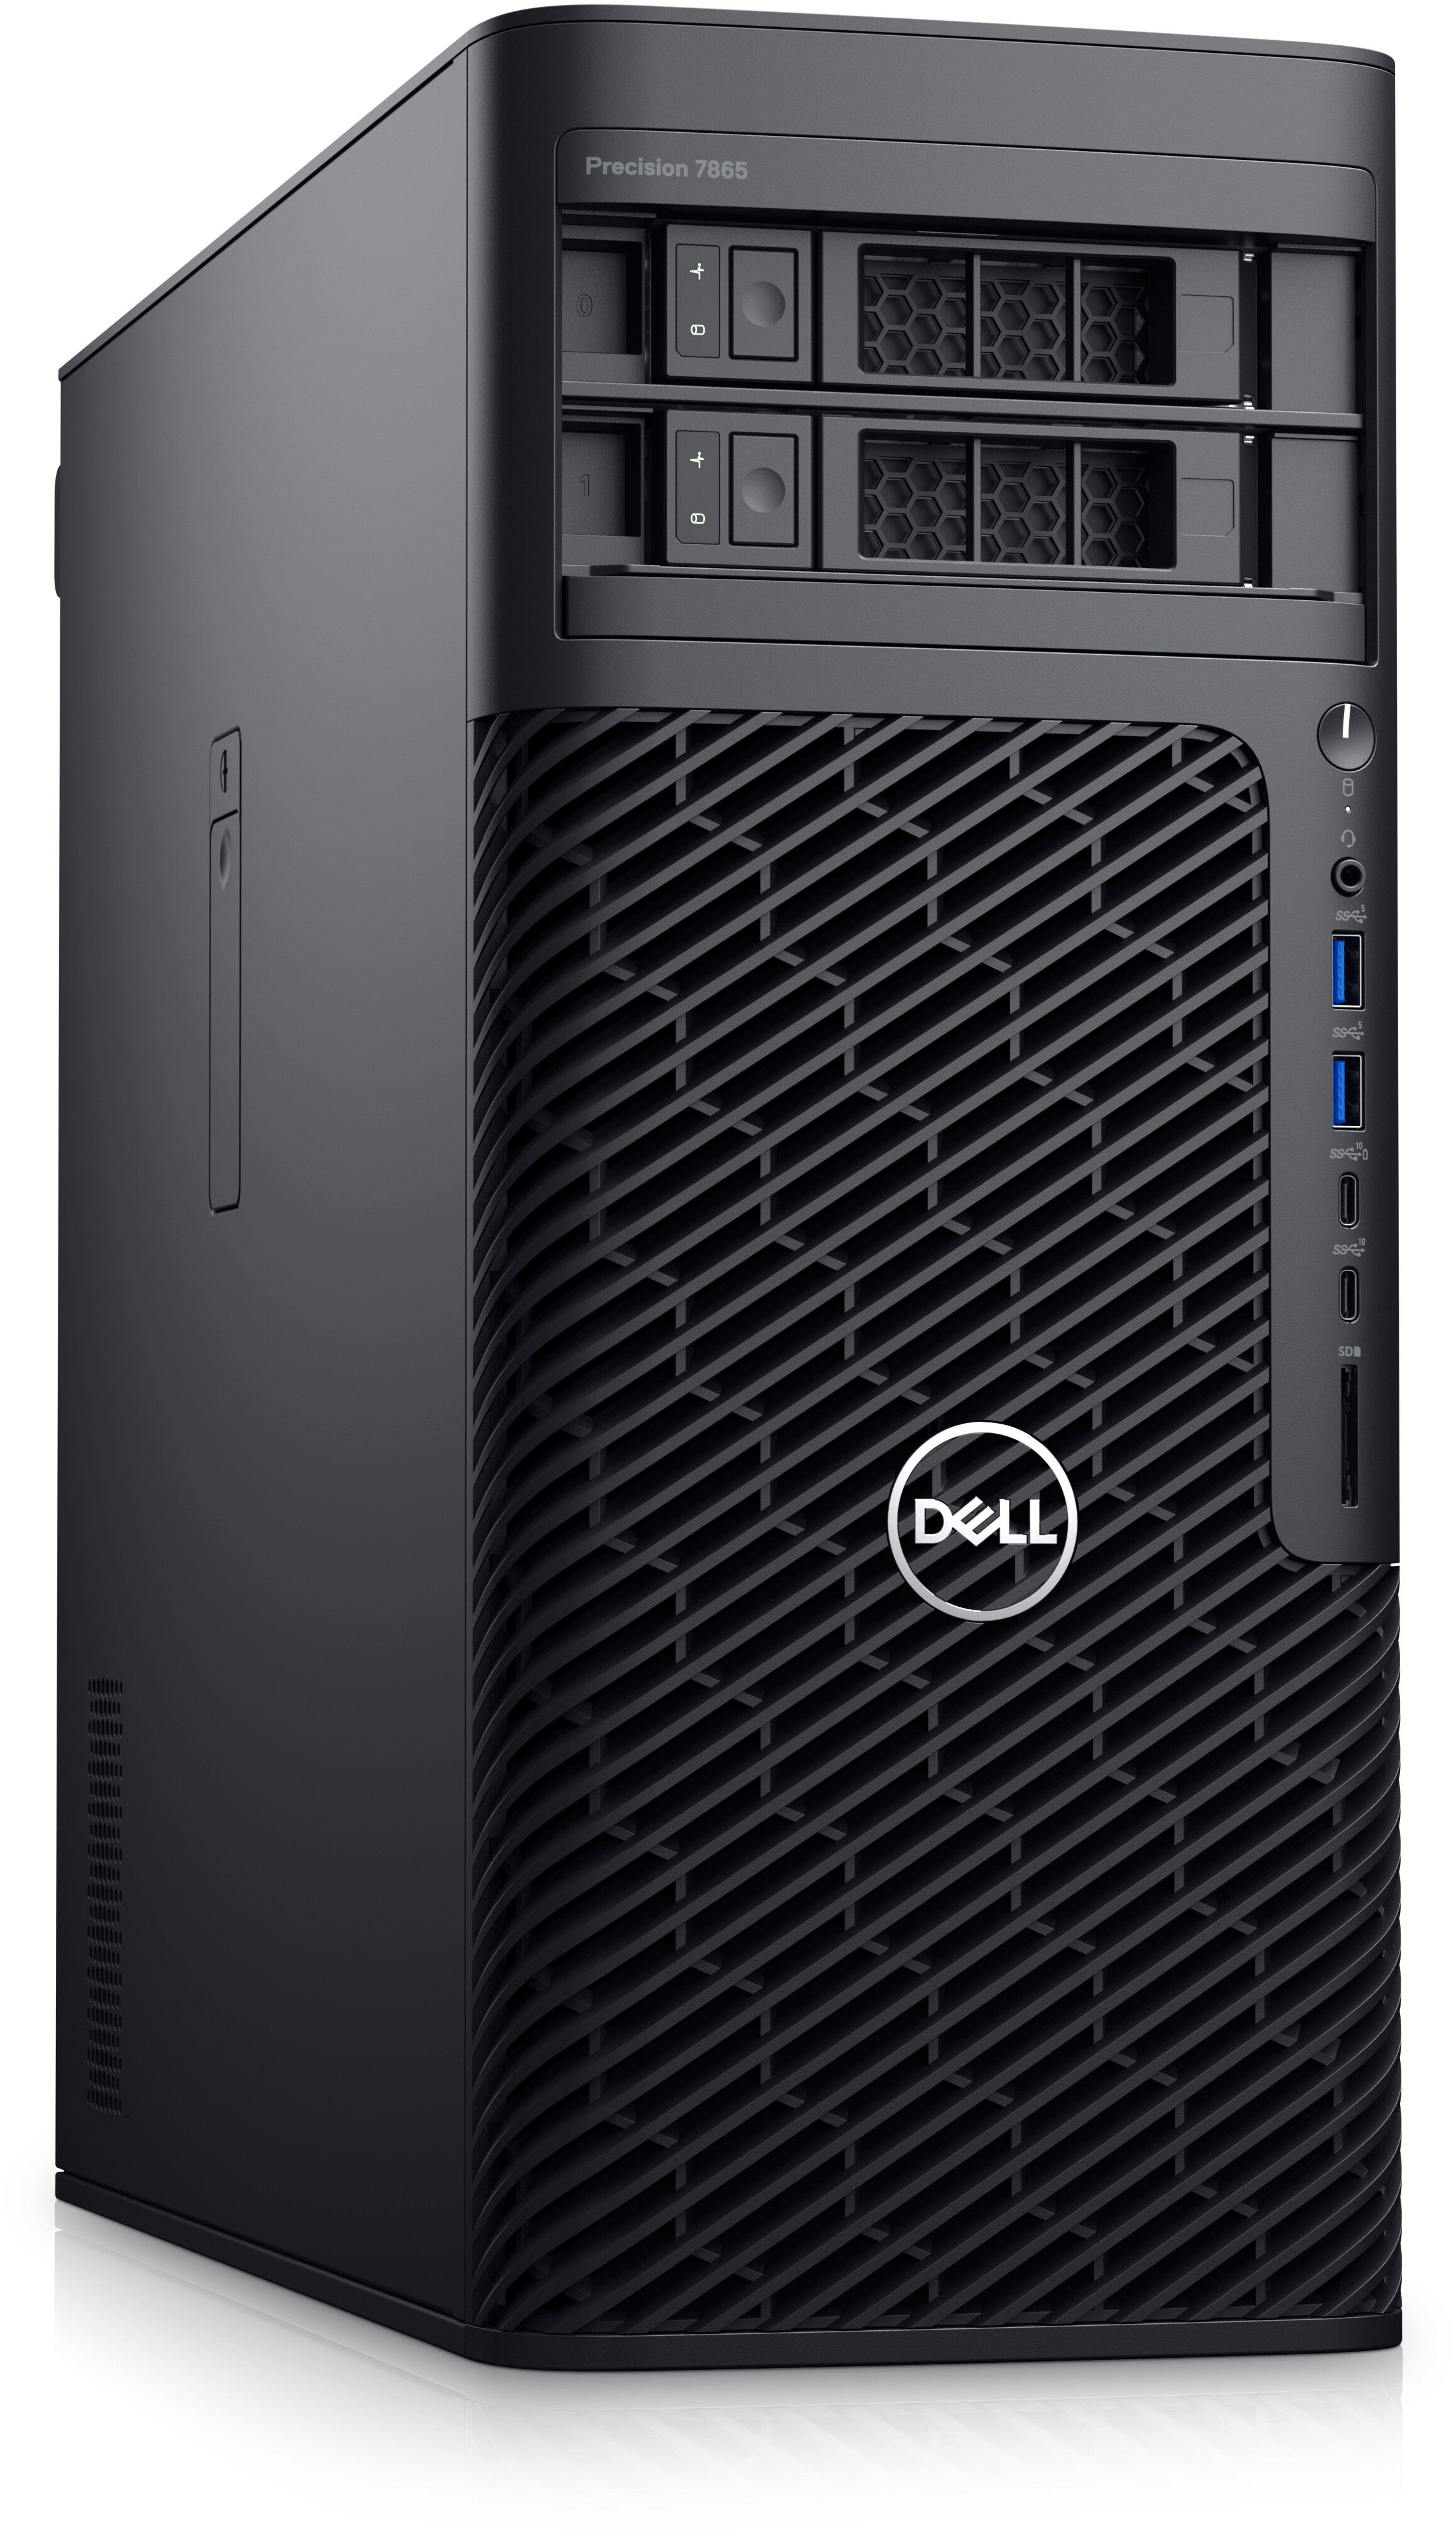 Precision 7865 Tower Workstation : Dell Workstations | Dell USA